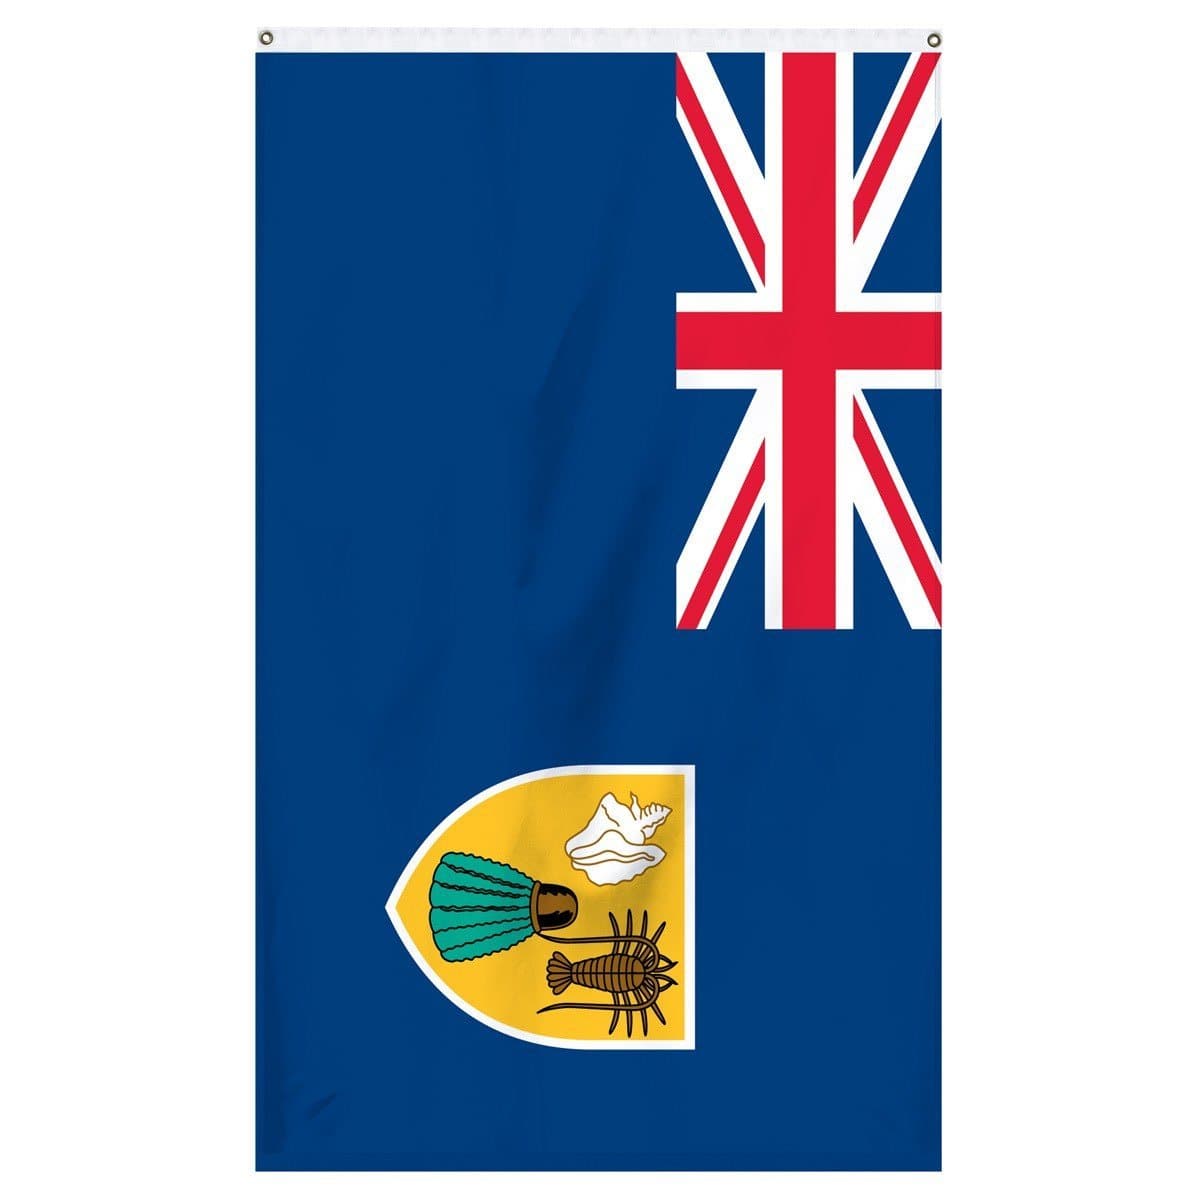 Turks and Caicos National Flag for sale to buy online from Atlantic Flag and Pole. Navy blue flag with great Britain cross along with a golden shield with images on it.